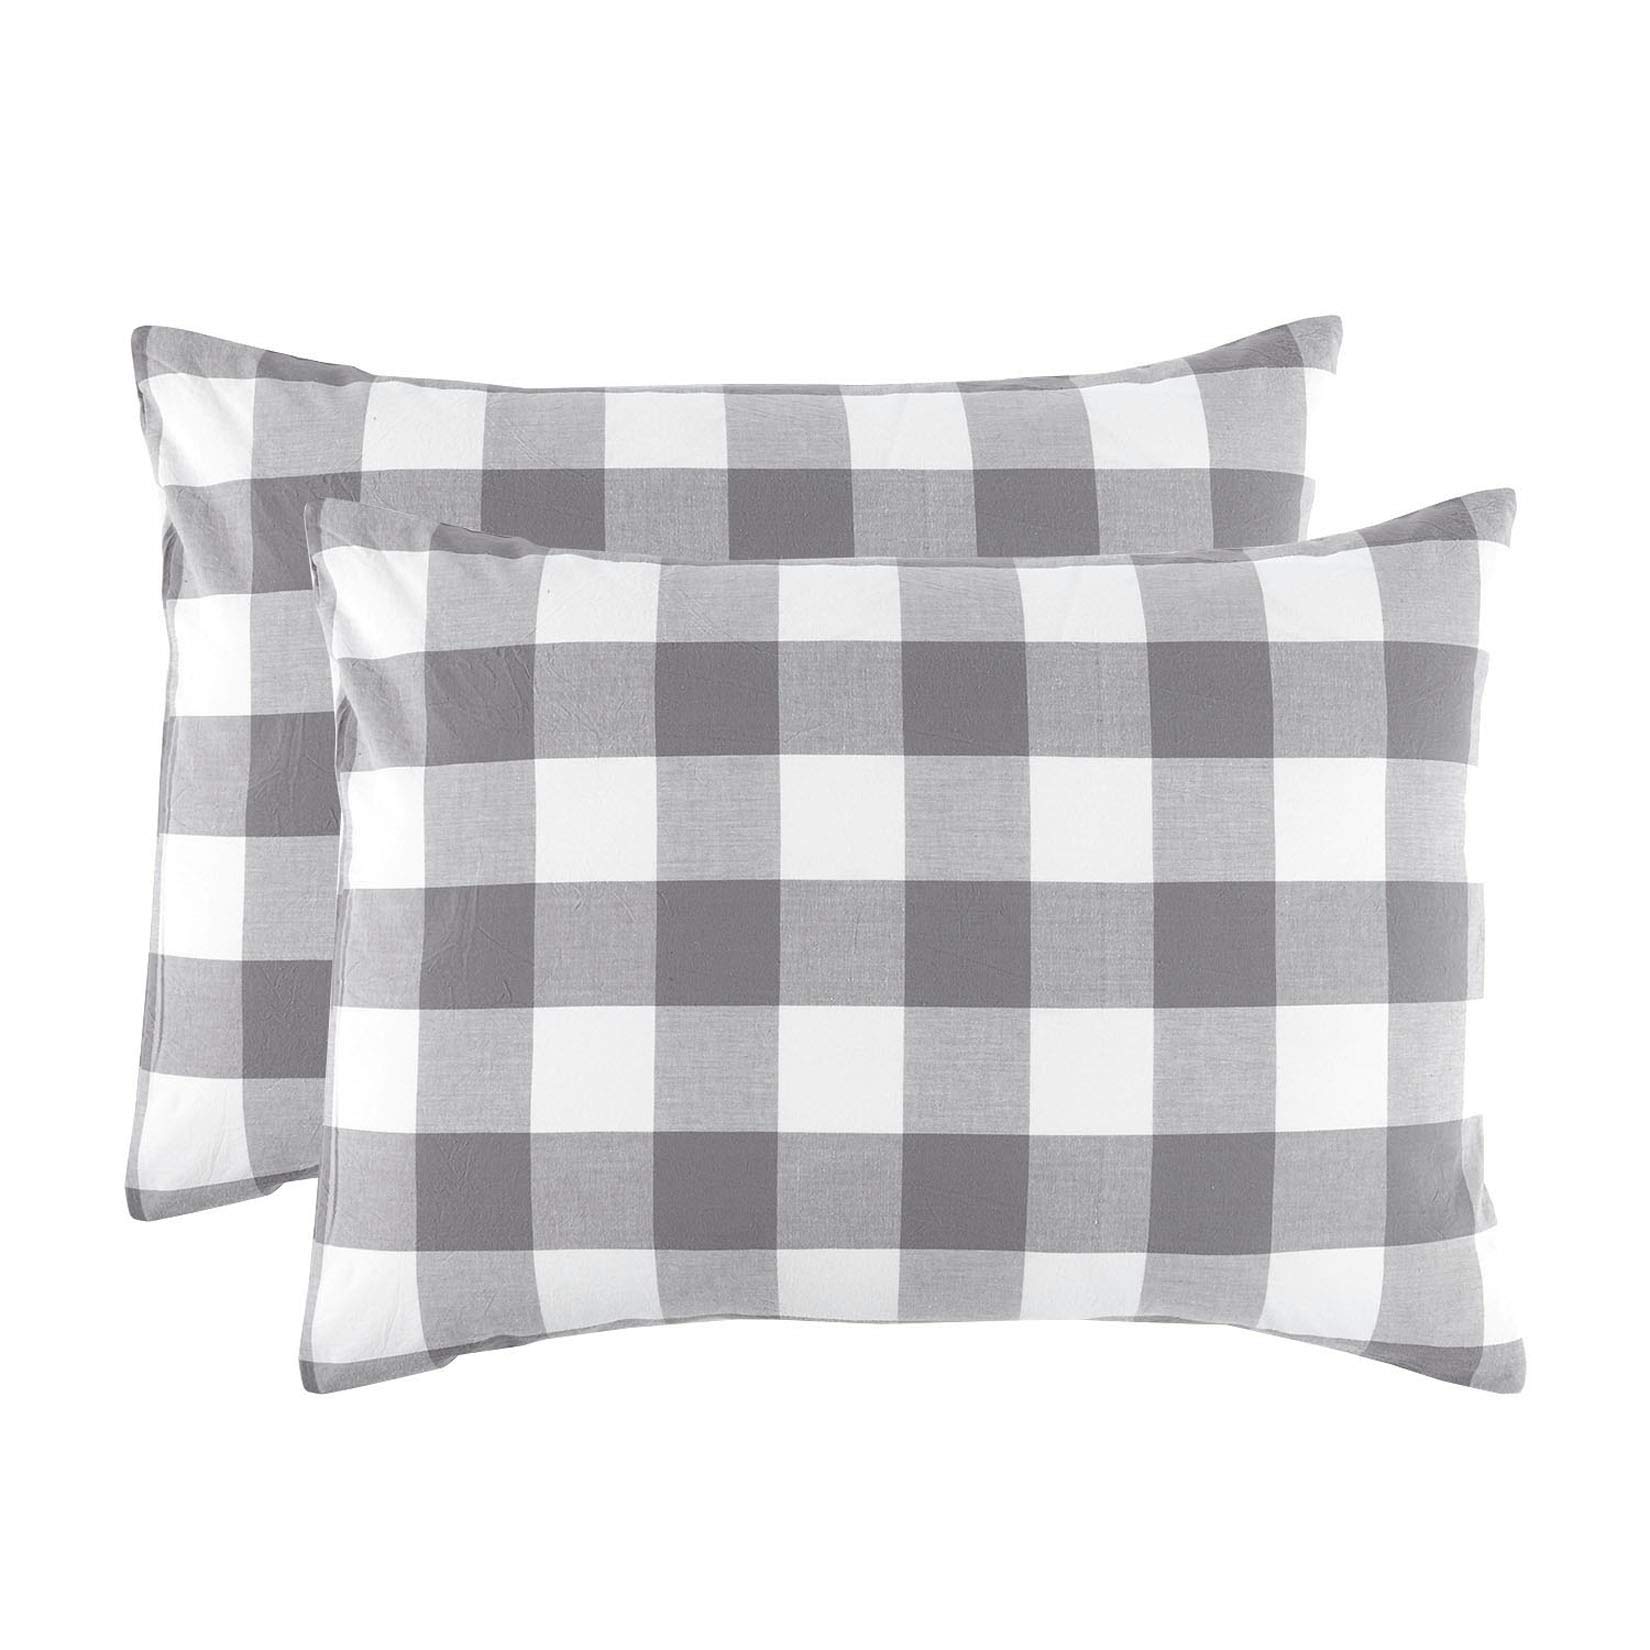 Book Cover Wake In Cloud - Pack of 2 Pillow Cases, 100% Washed Cotton, Grey Gray White Buffalo Checker Gingham Geometric Plaid Printed Soft Pillowcases (Standard Size, 20x26 Inches) Standard (20